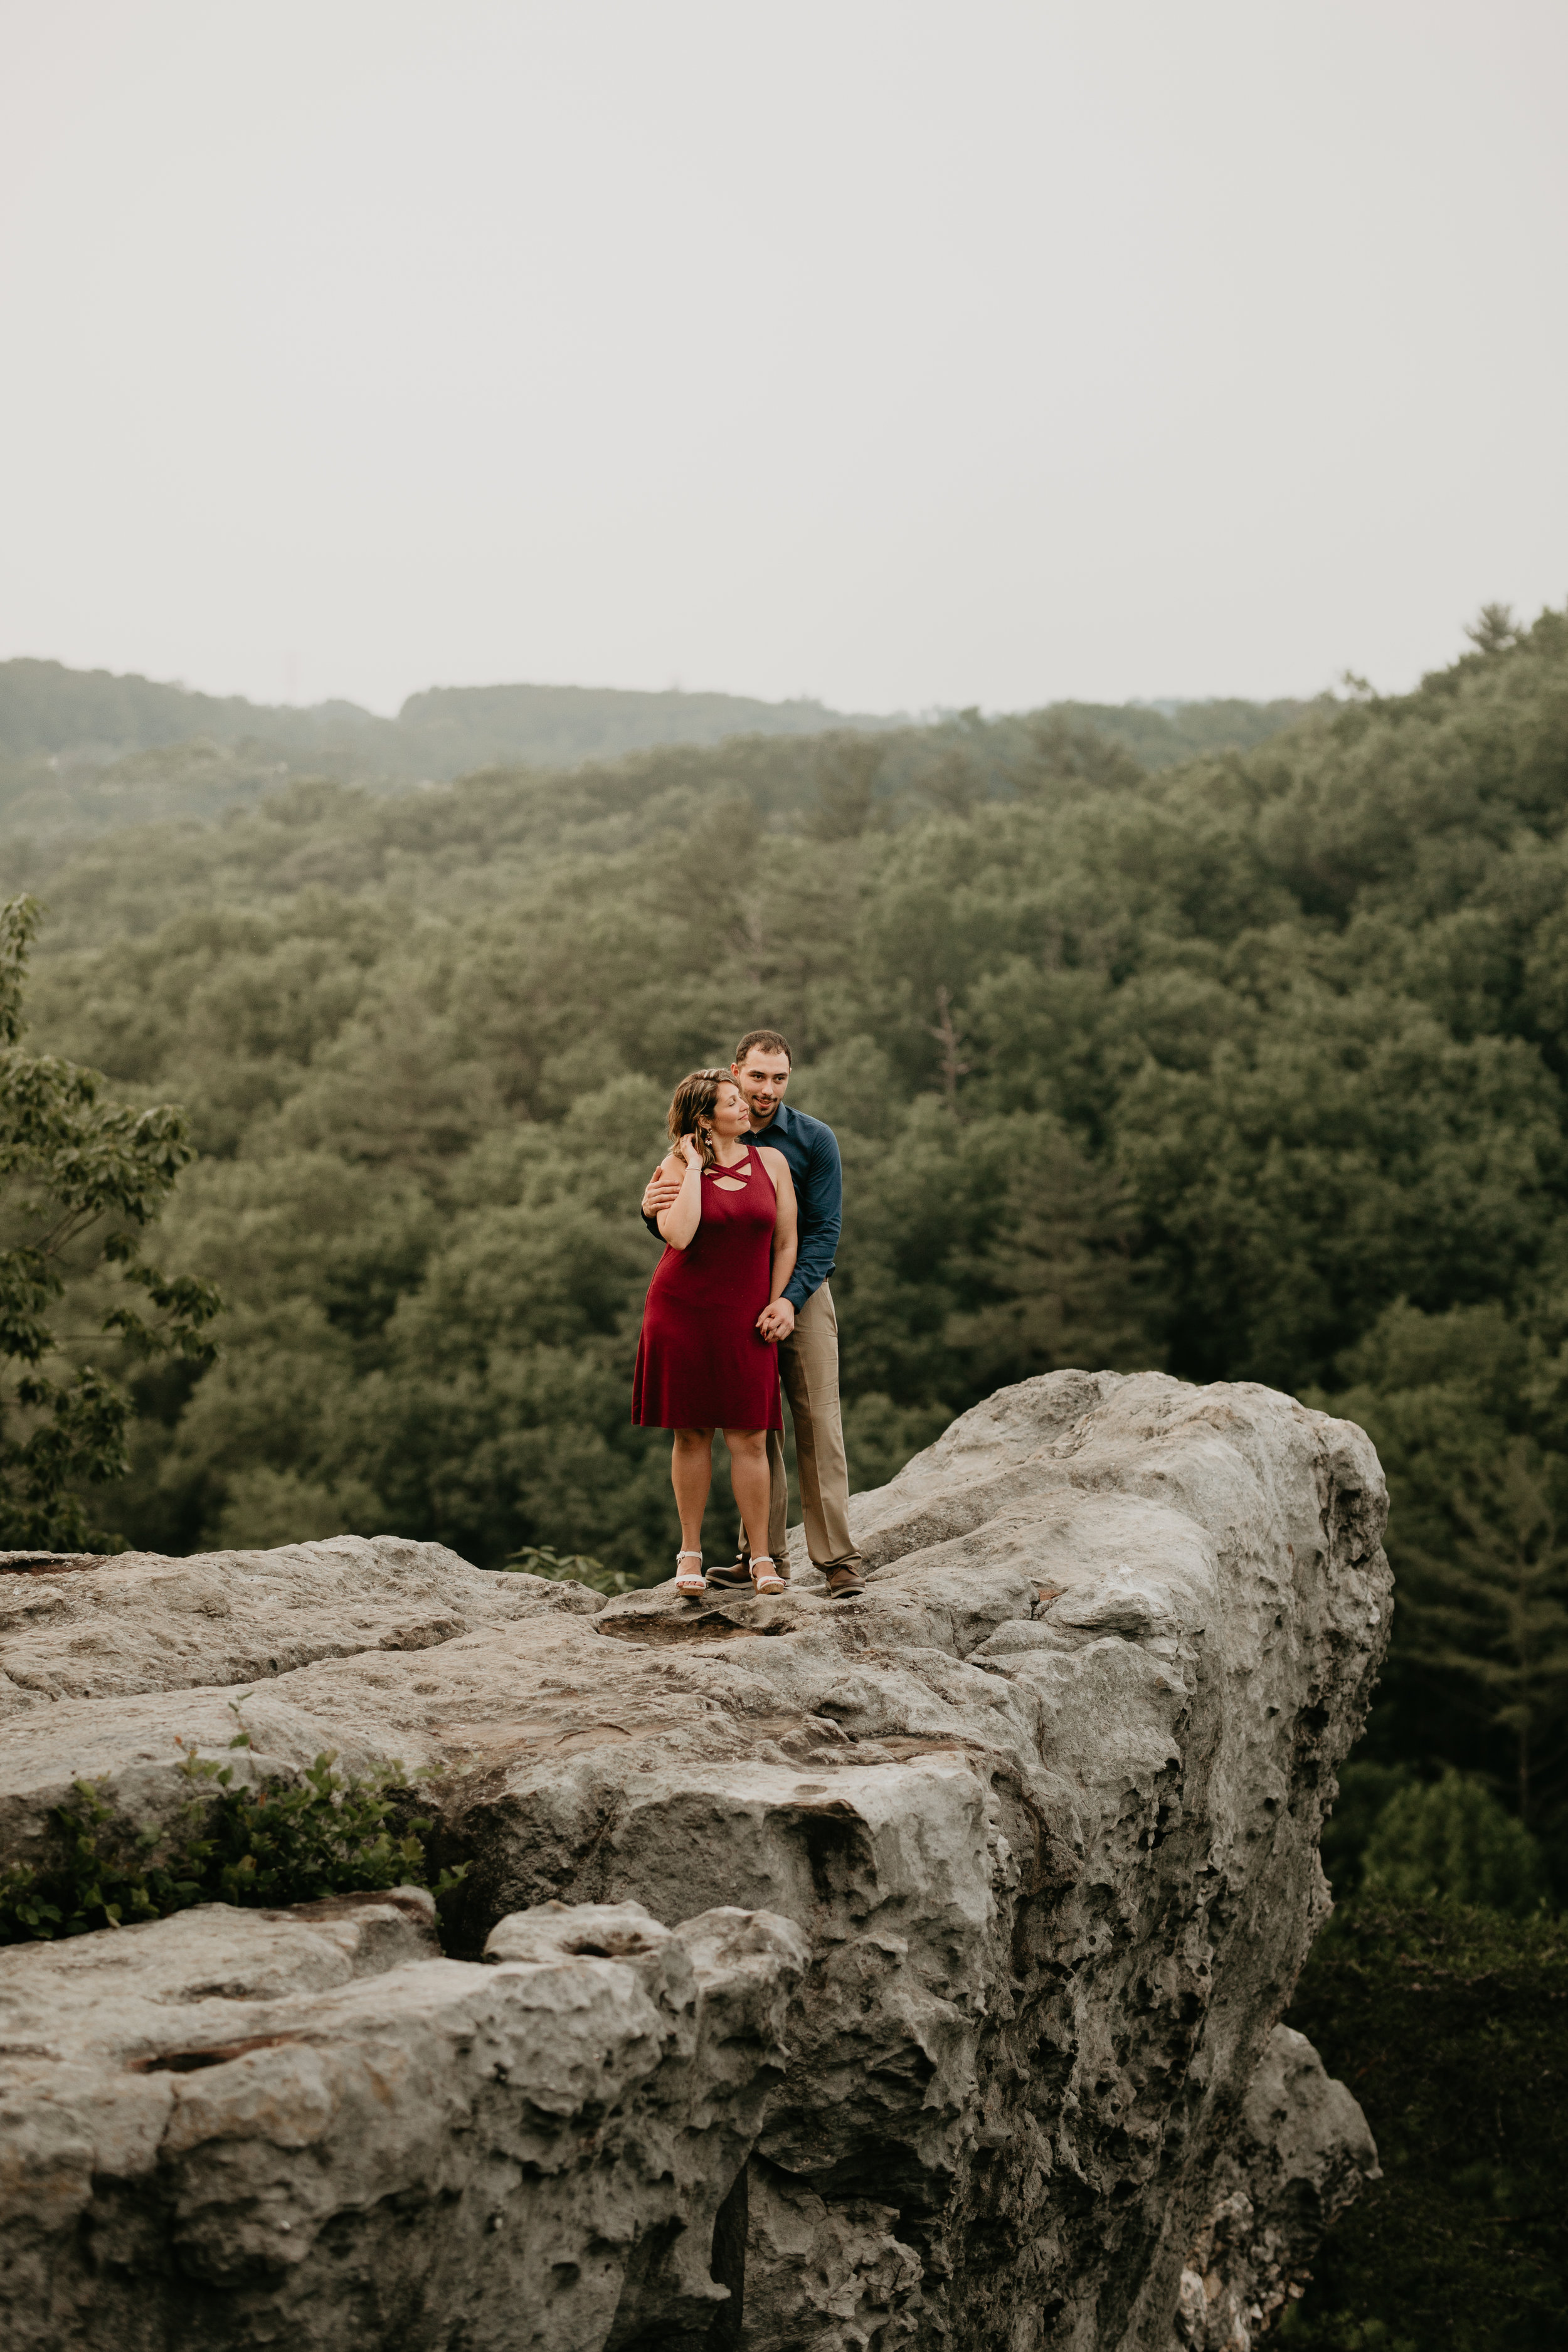 Nicole-Daacke-Photography-rock-state-park-overlook-king-queen-seat-maryland-hiking-adventure-engagement-session-photos-portraits-summer-bel-air-dog-engagement-session-26.jpg